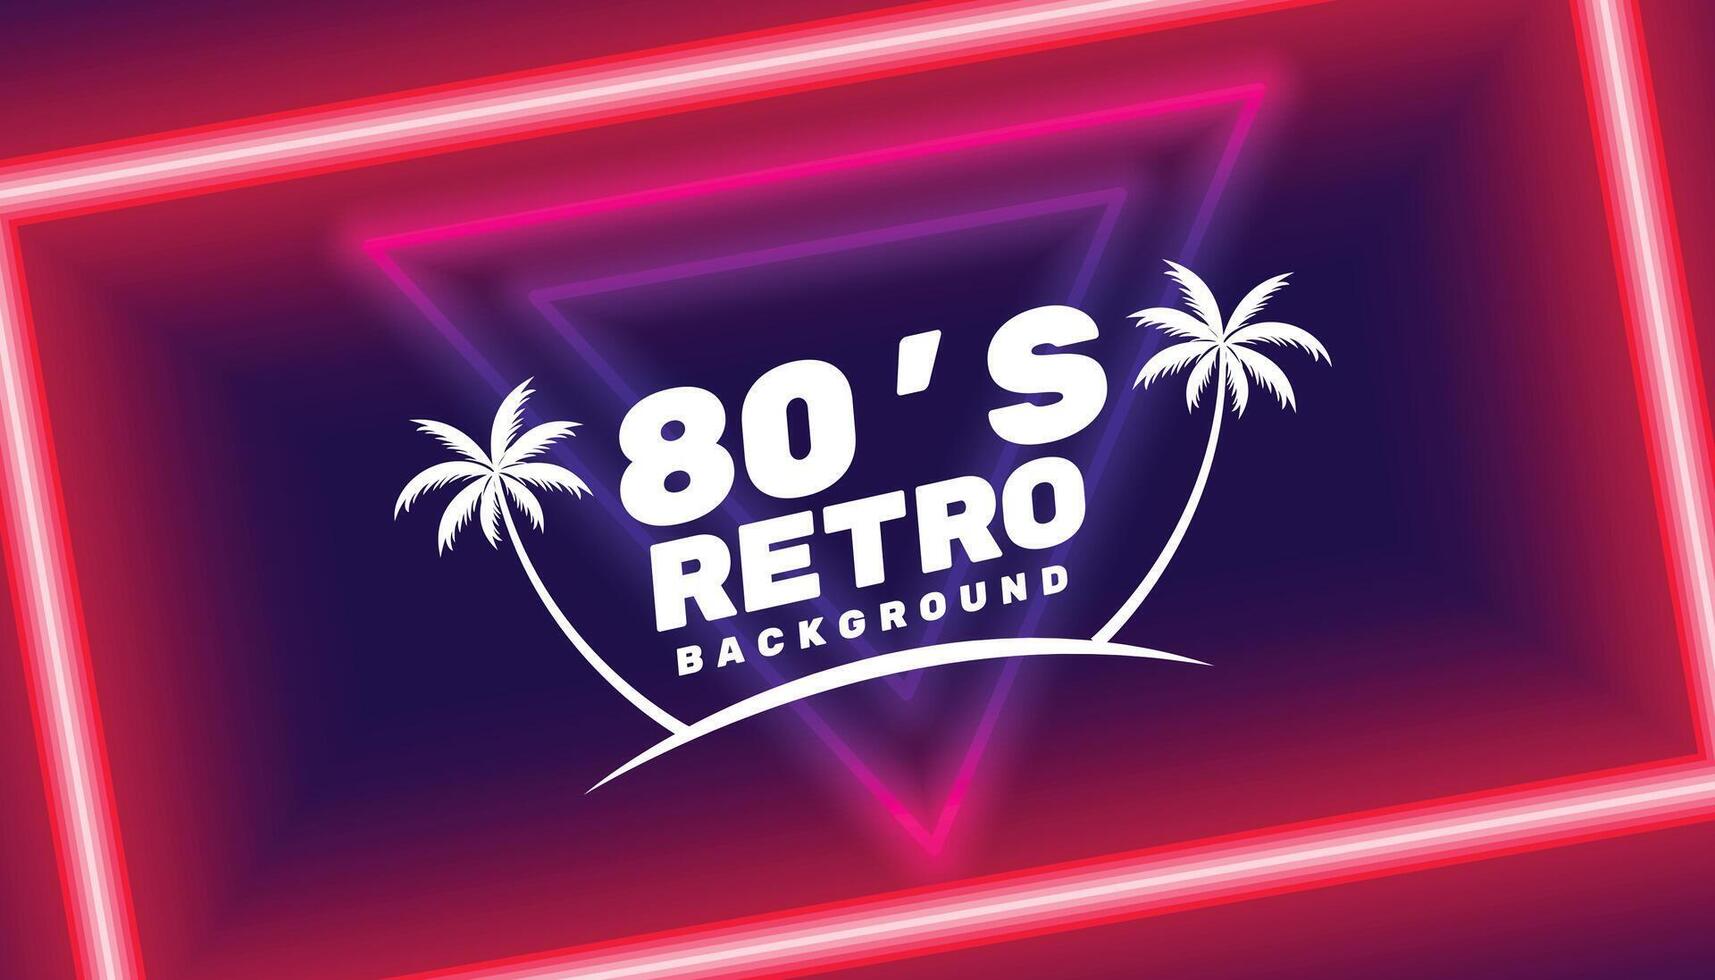 80s retro paradise background with neon led shapes vector